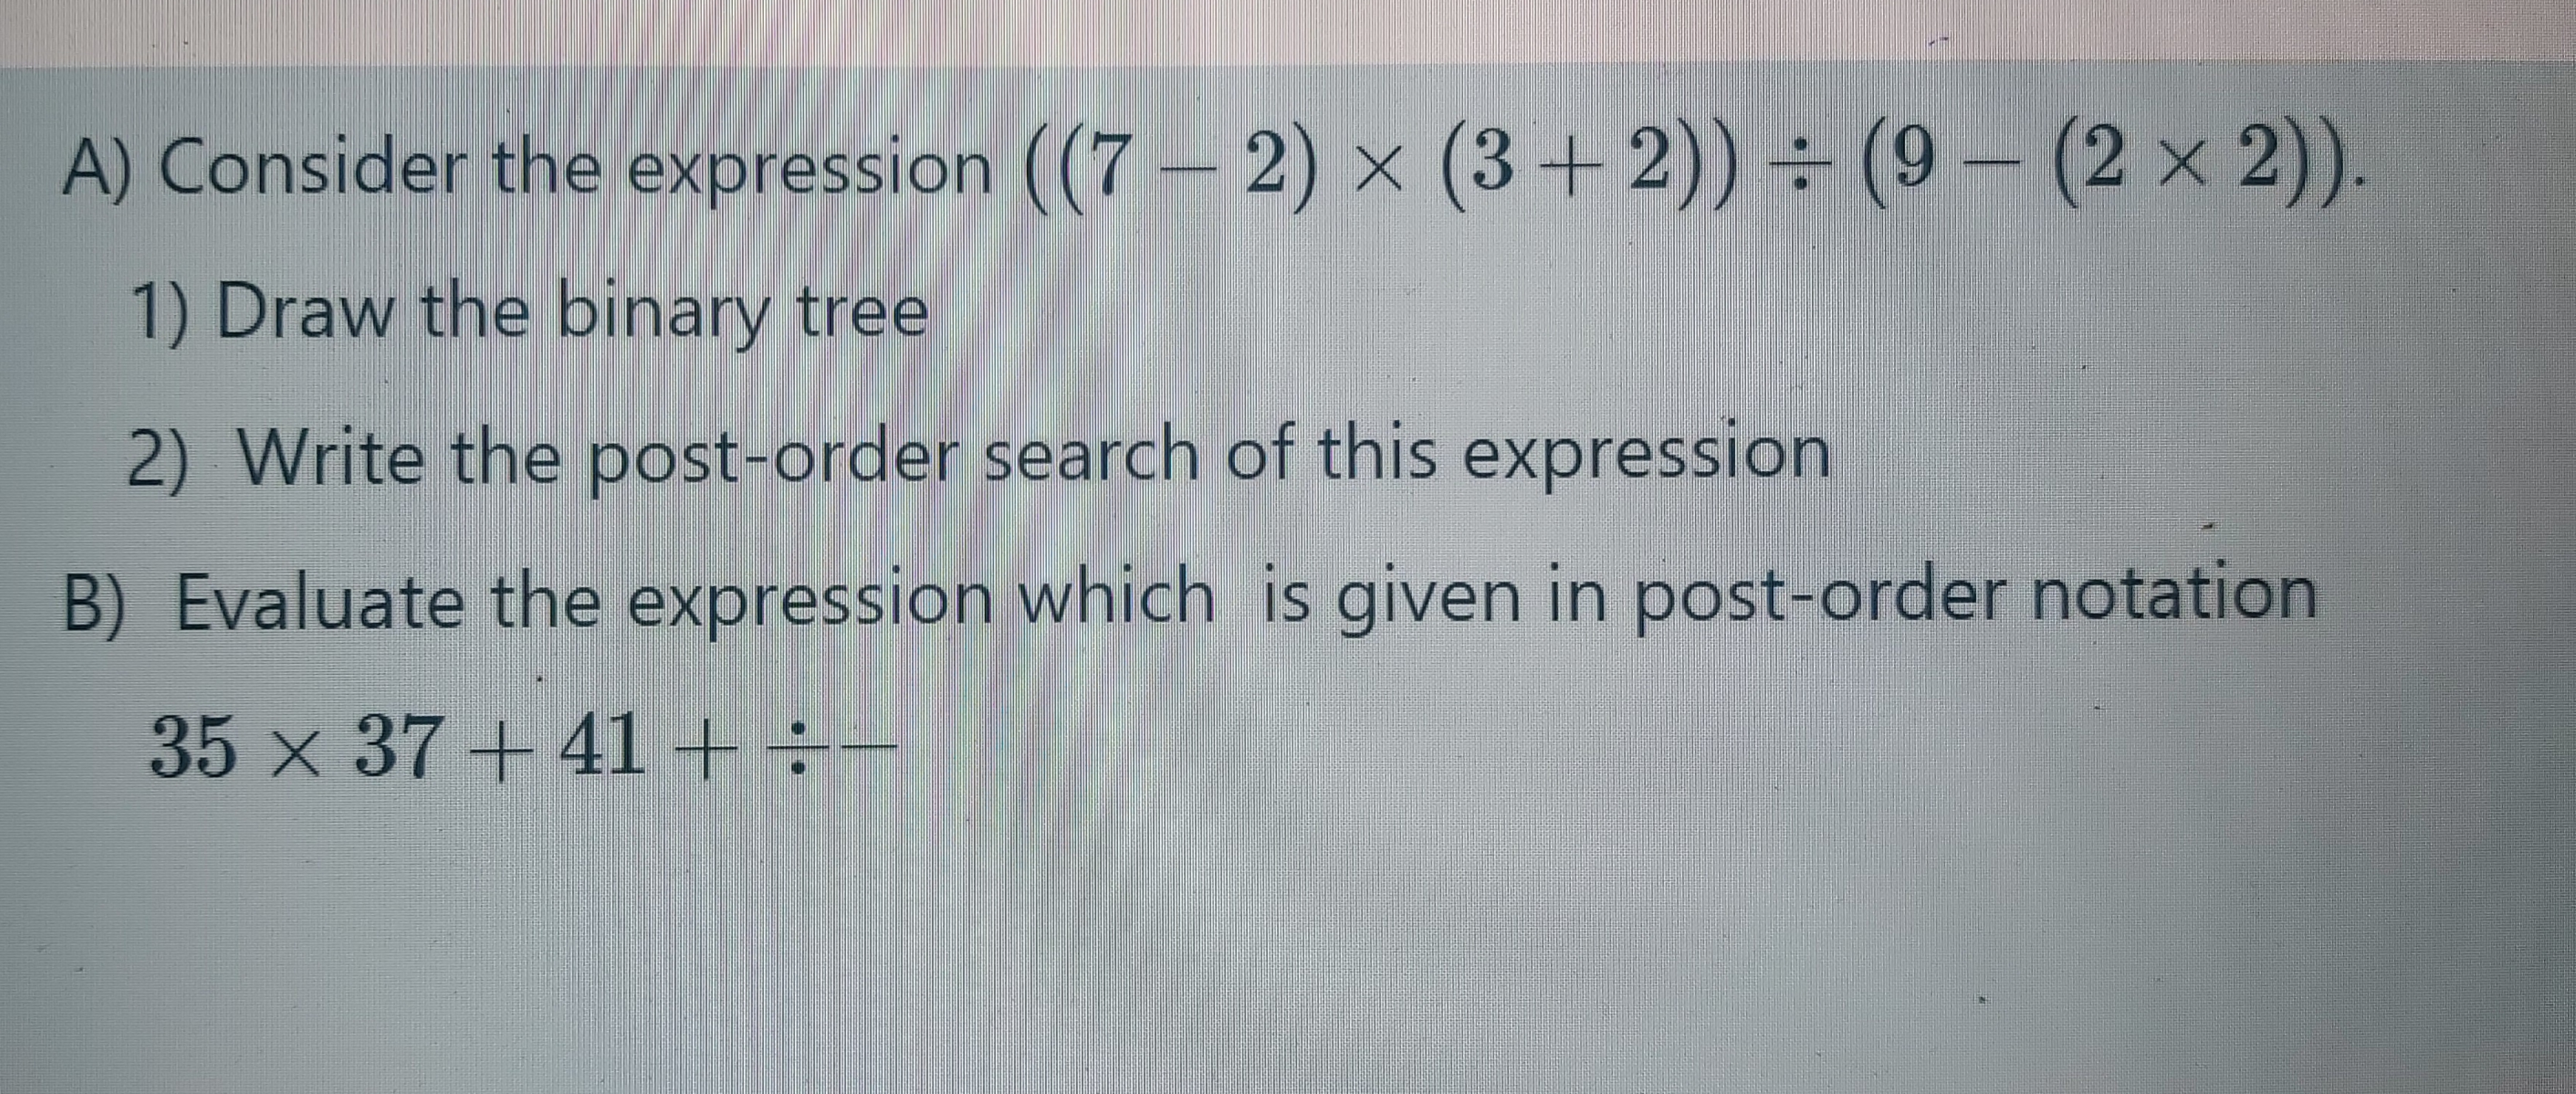 A) Consider the expression ((7 - 2) × (3+2)) ÷ (9– (2 x 2)).
1) Draw the binary tree
2) Write the post-order search of this expression
